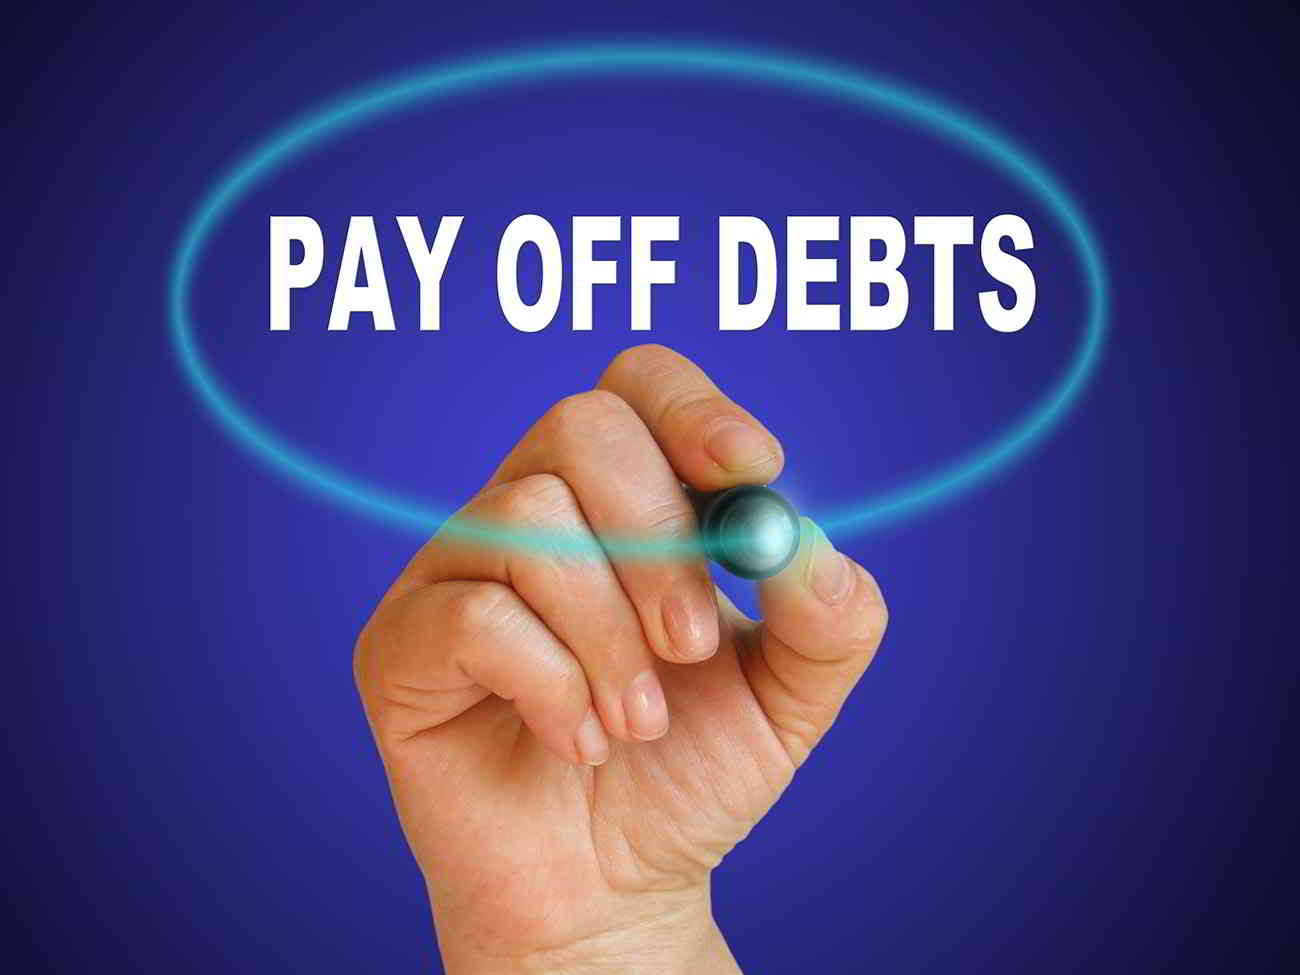 pay off debt sign